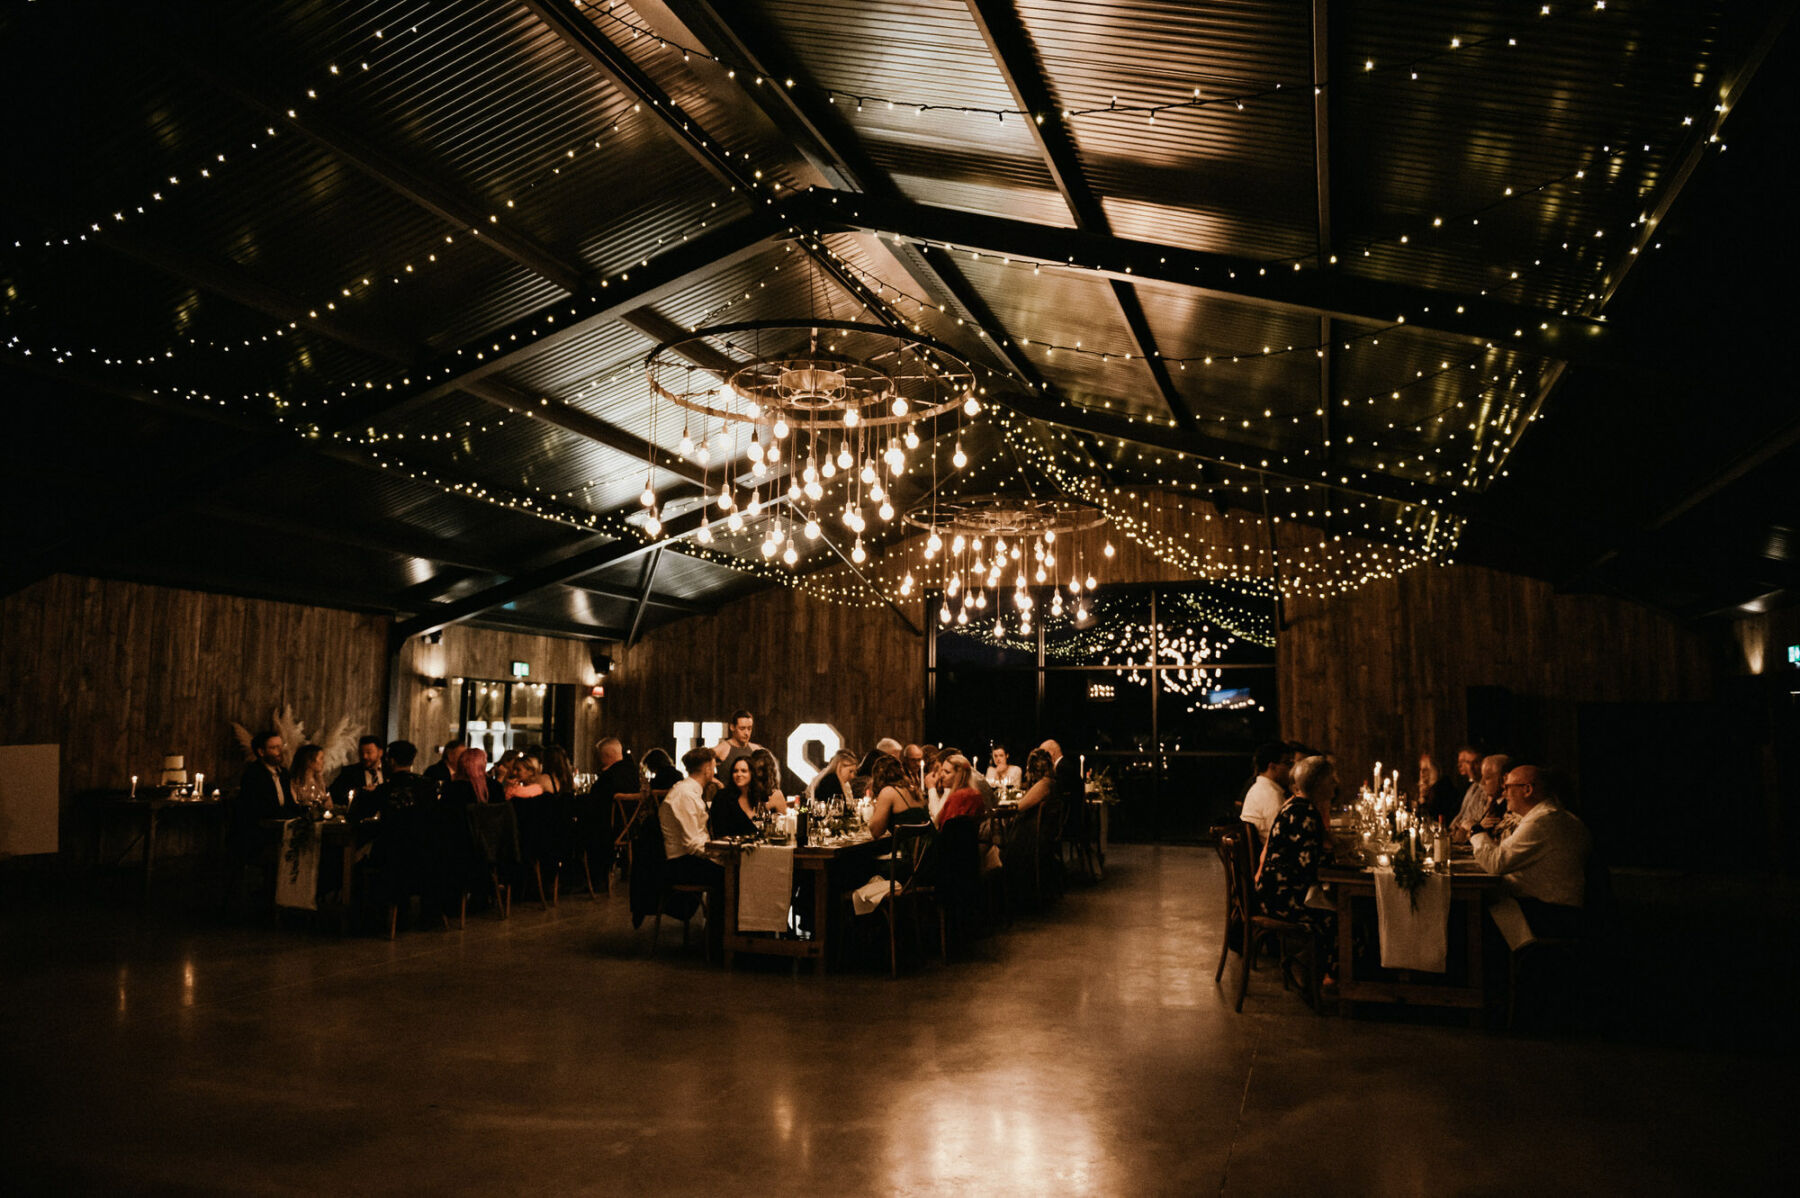 Silchester Farm barn wedding venue with hanging fairy lights. Jessica Grace Photography.